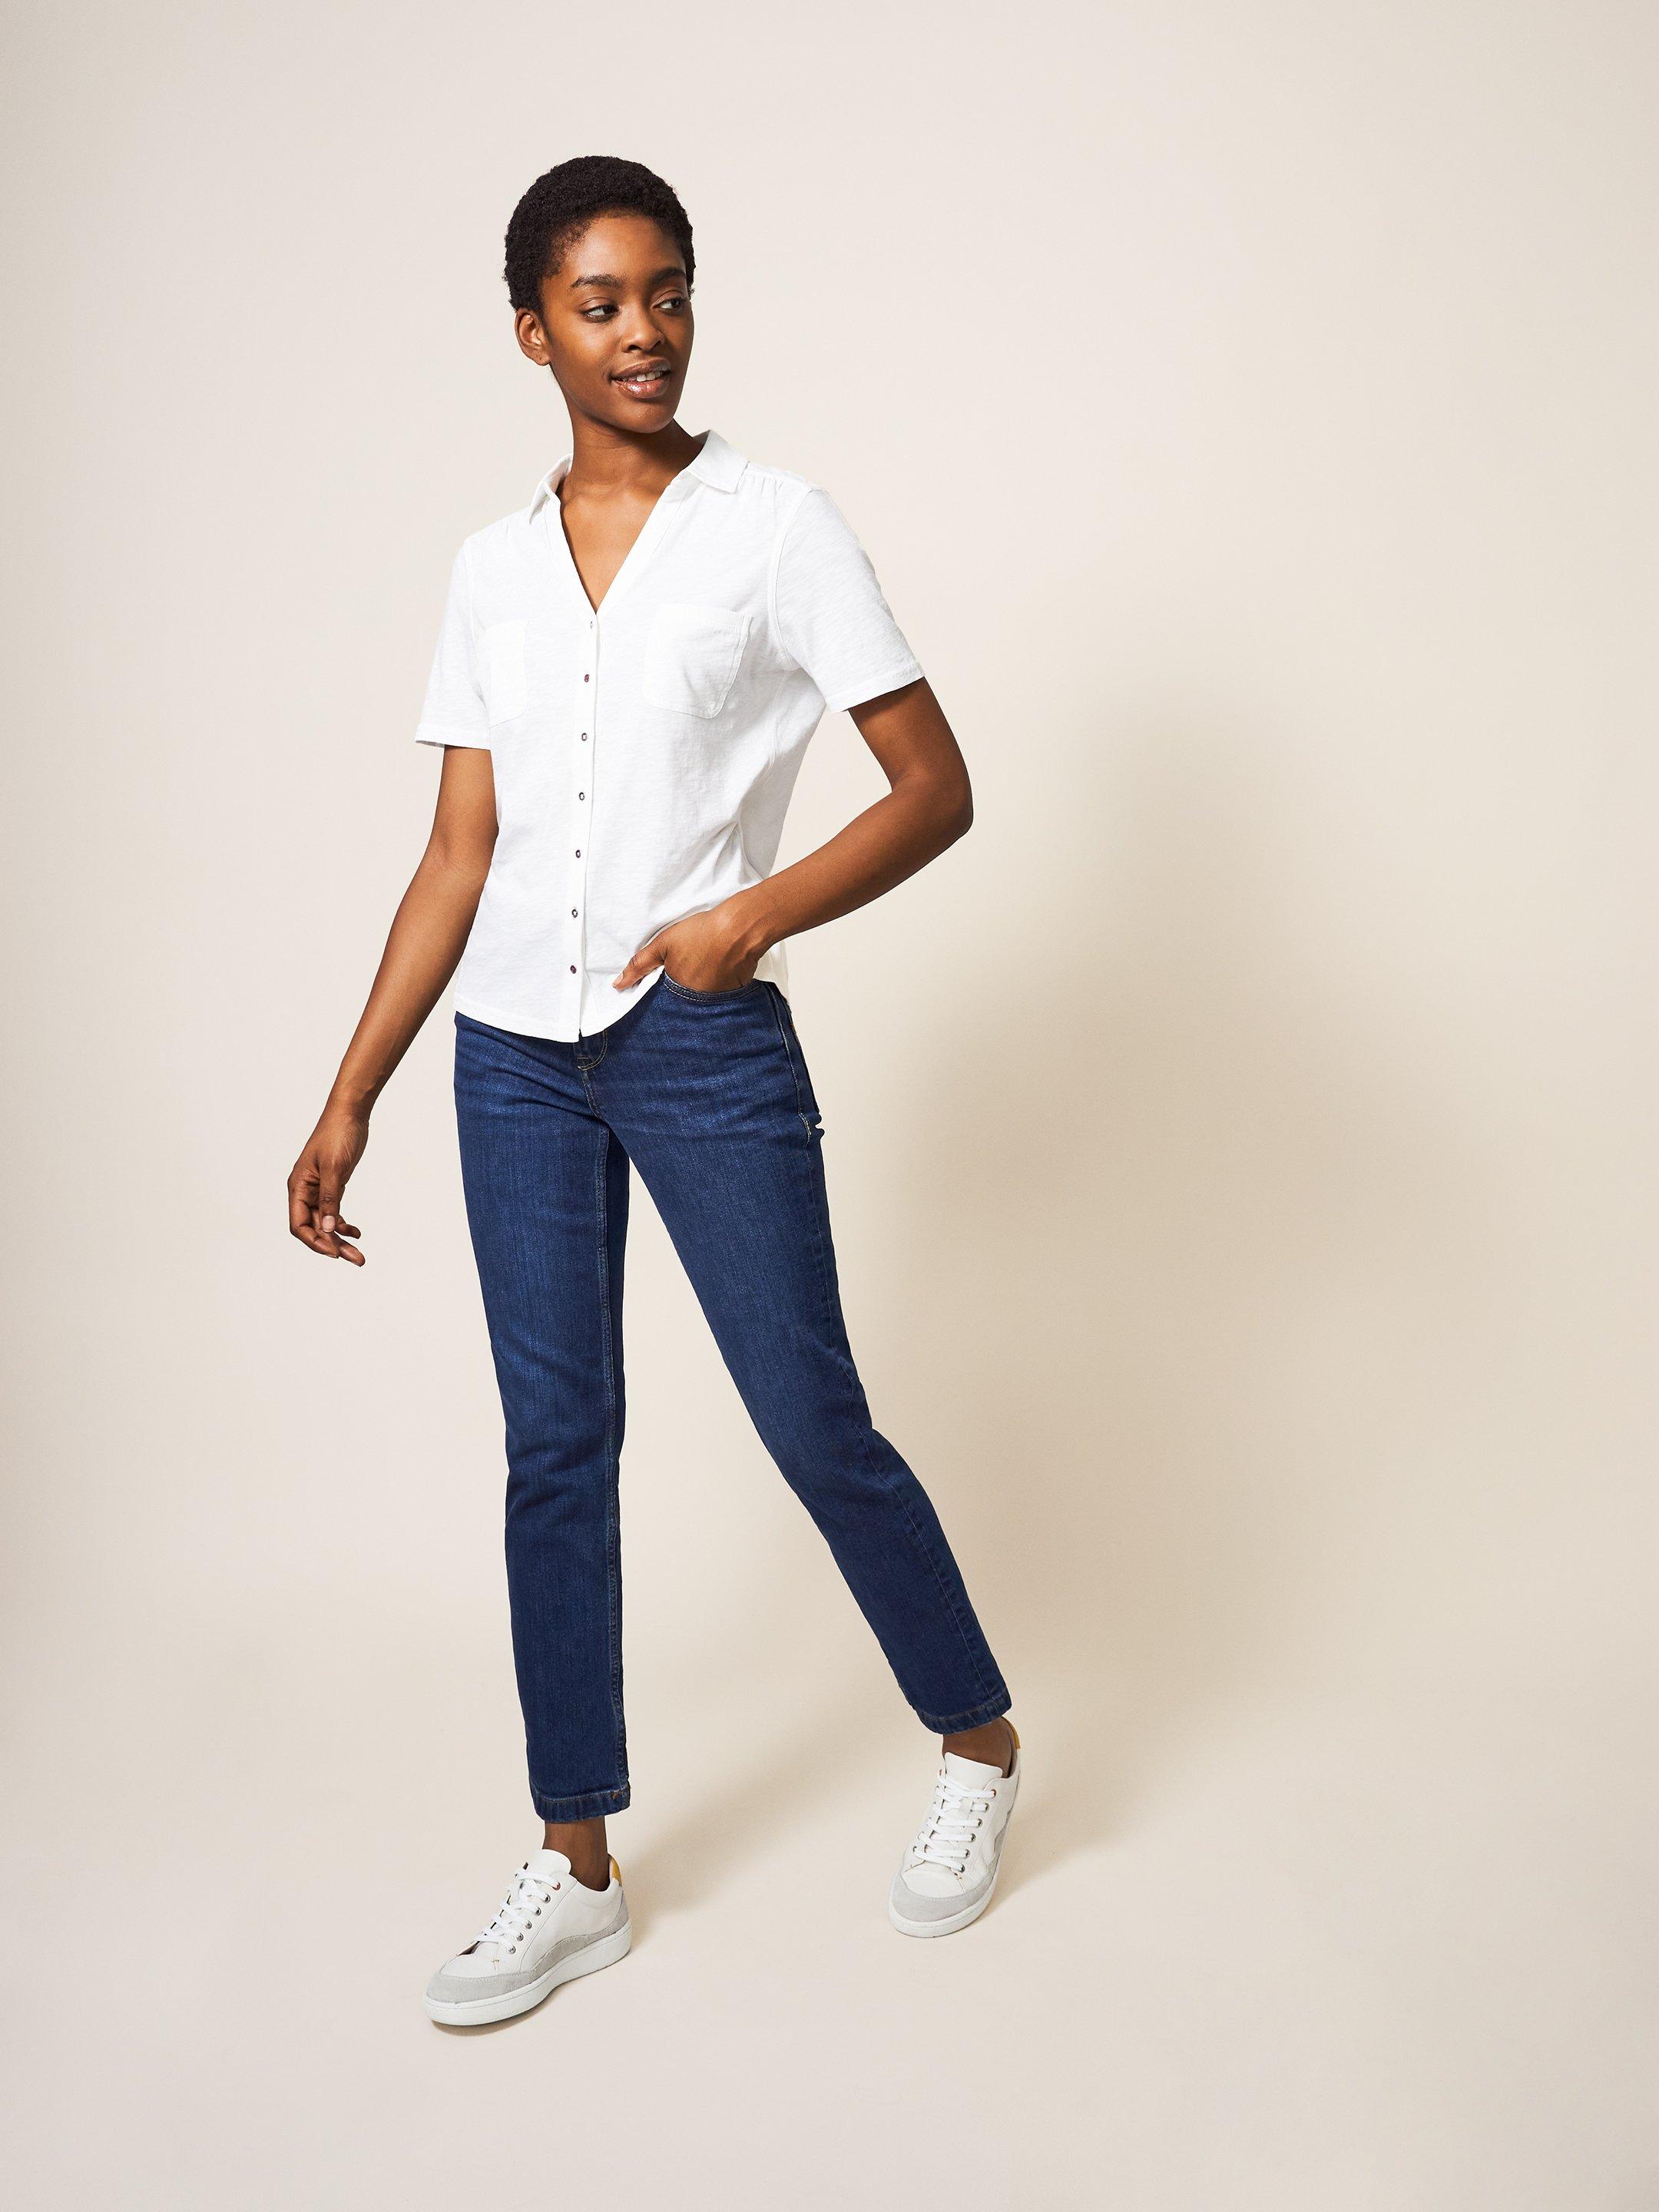 Penny Pocket Jersey Shirt in BRIL WHITE - MODEL FRONT